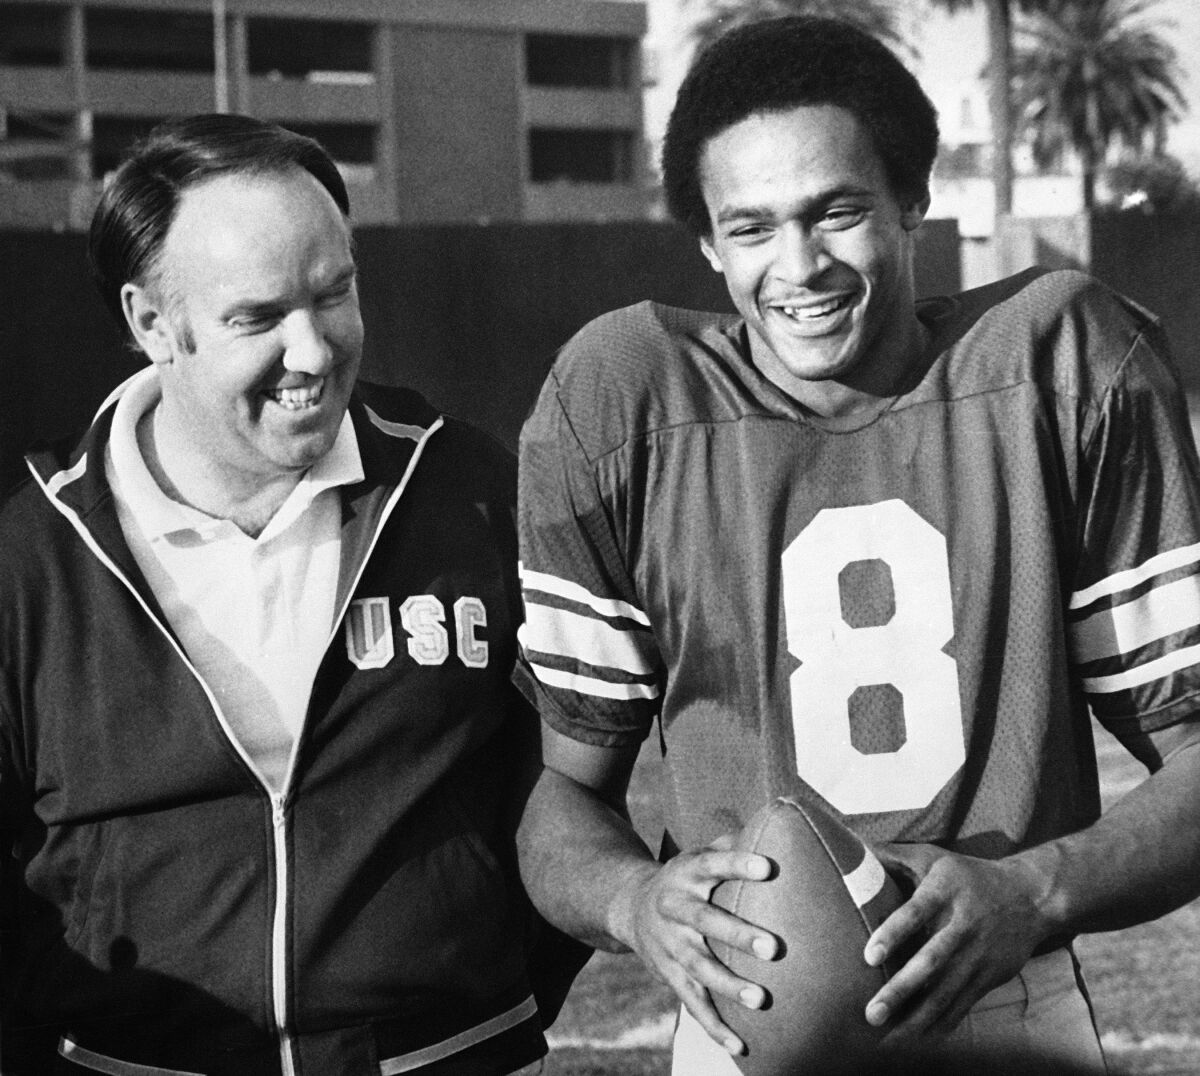 USC coach John Robinson and quarterback Vince Evans chat on December 14, 1976 as the Trojans prepared to play Michigan